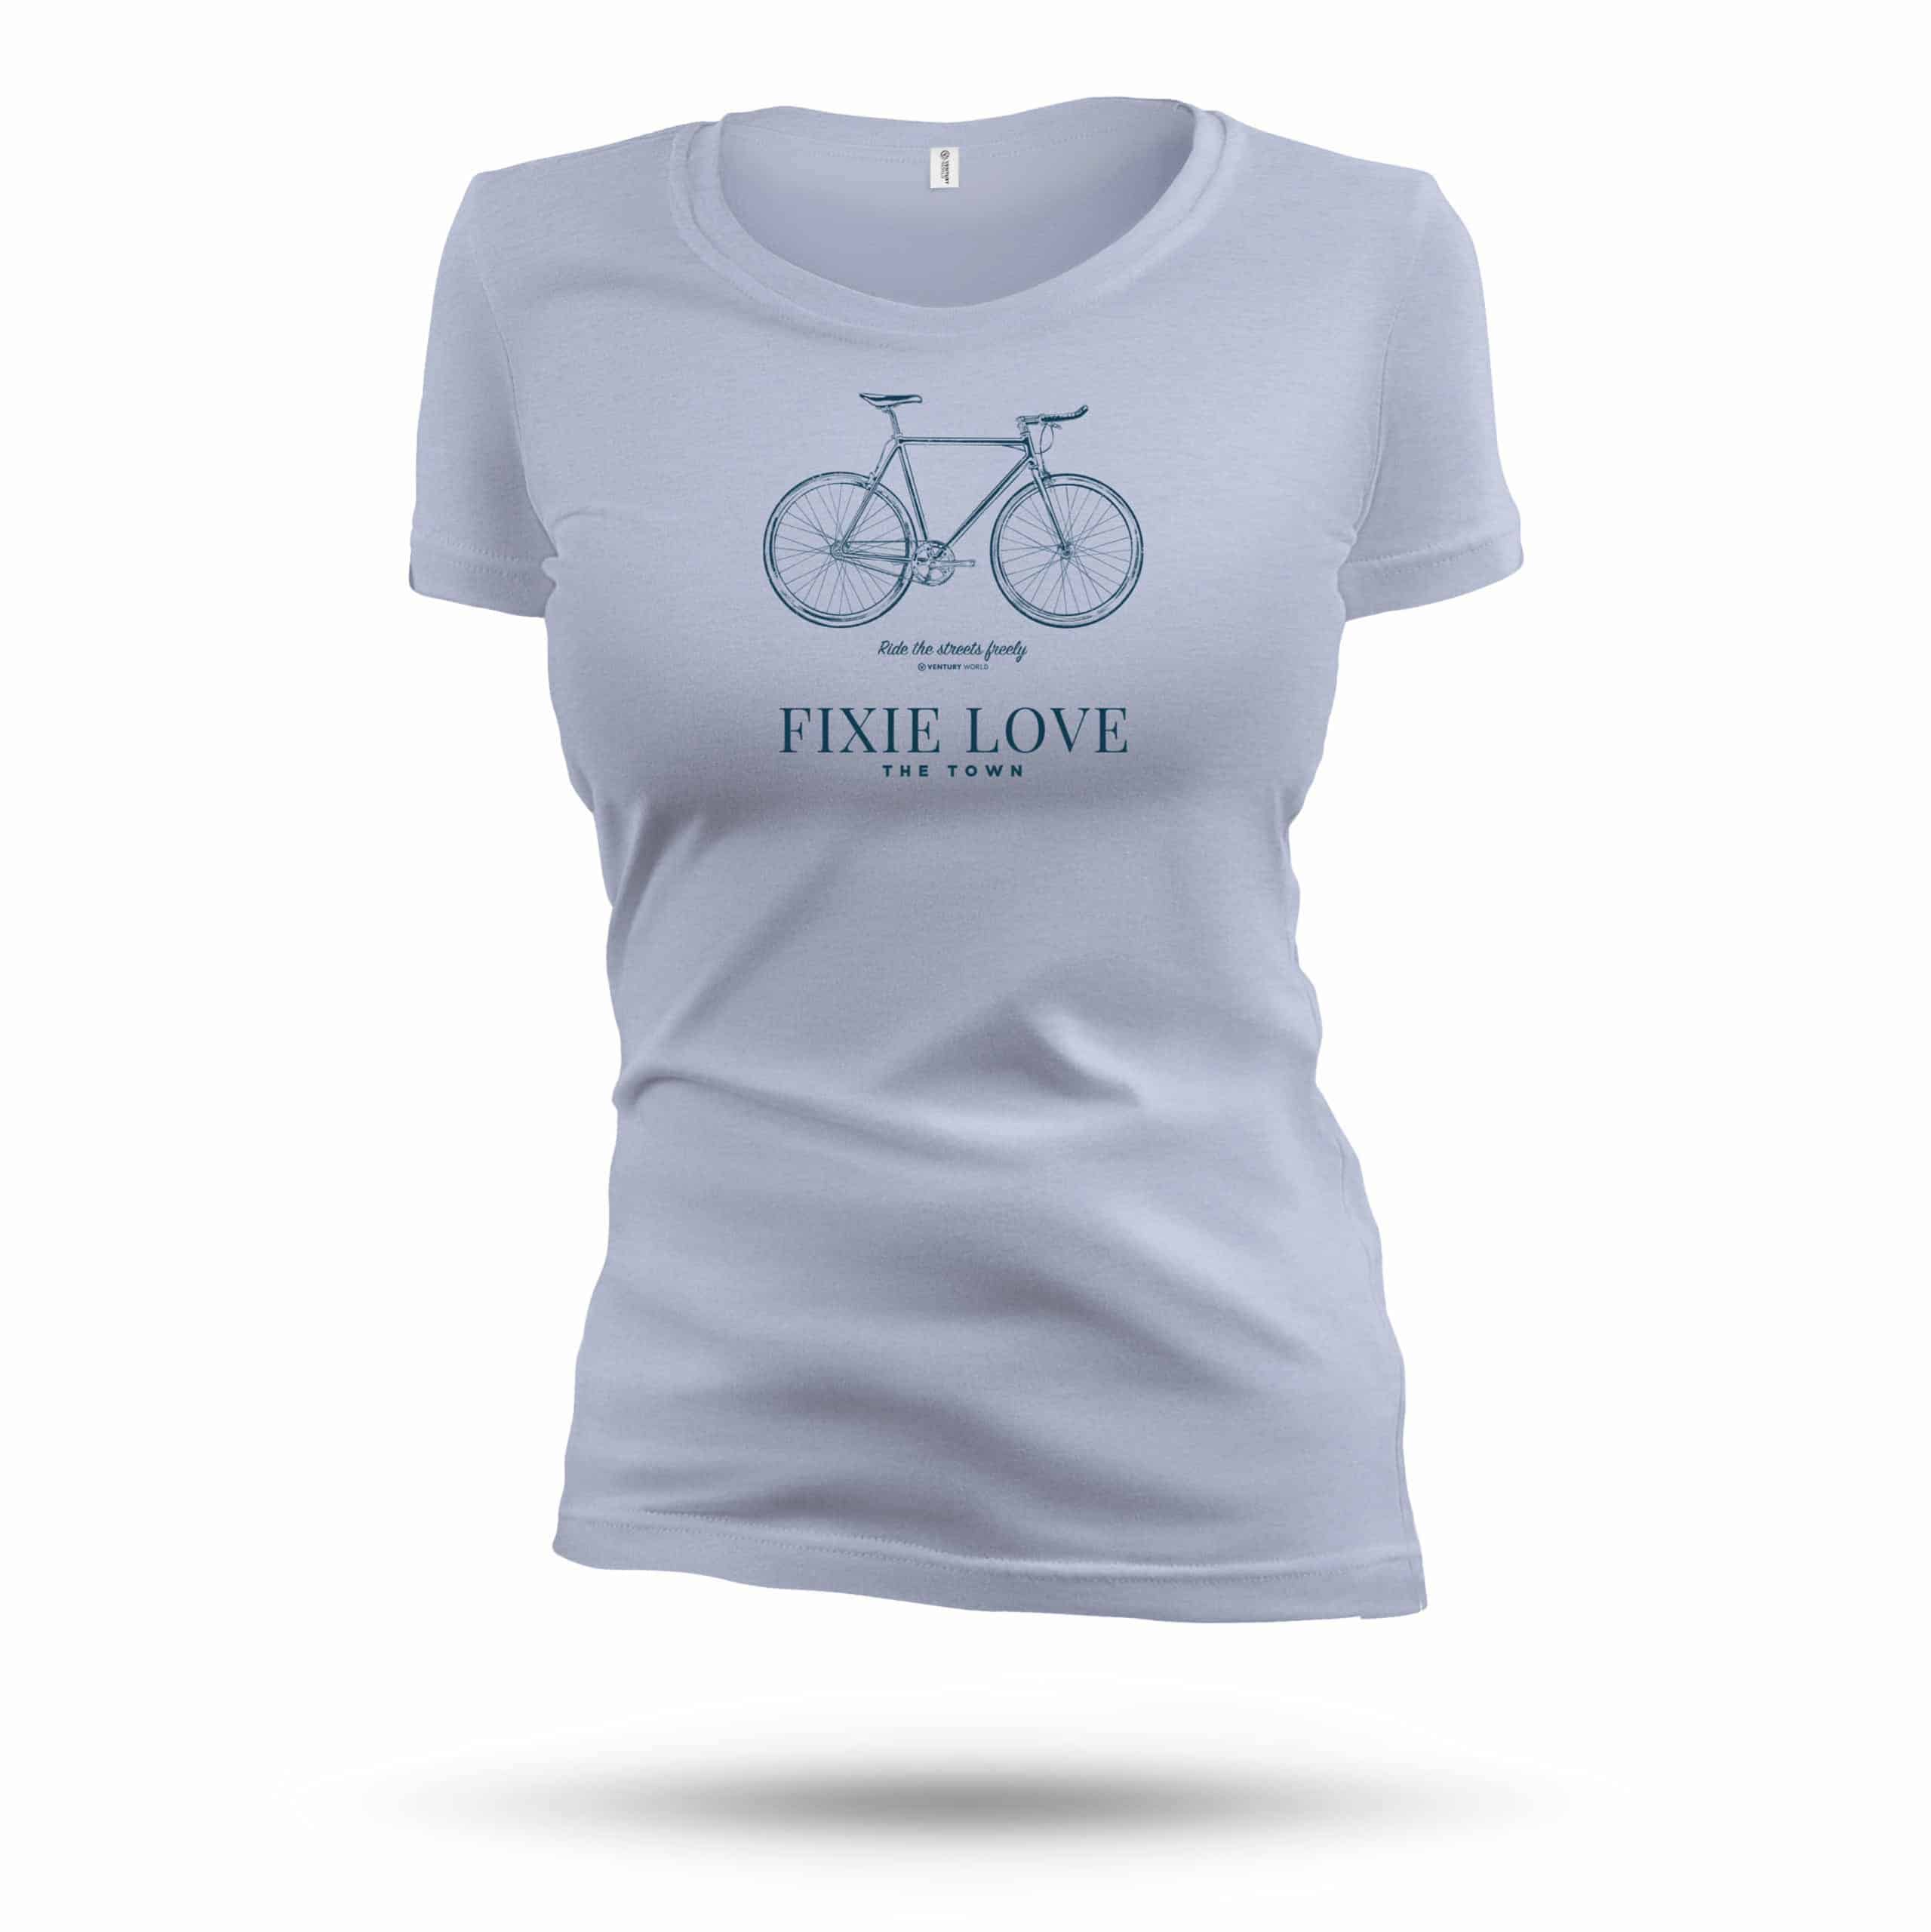 Women's cycling t-shirt - Women's Fixie Bike - Ride the streets freely - Live freely 100% Natural t-shirt collection Fitted cut, large round neck.